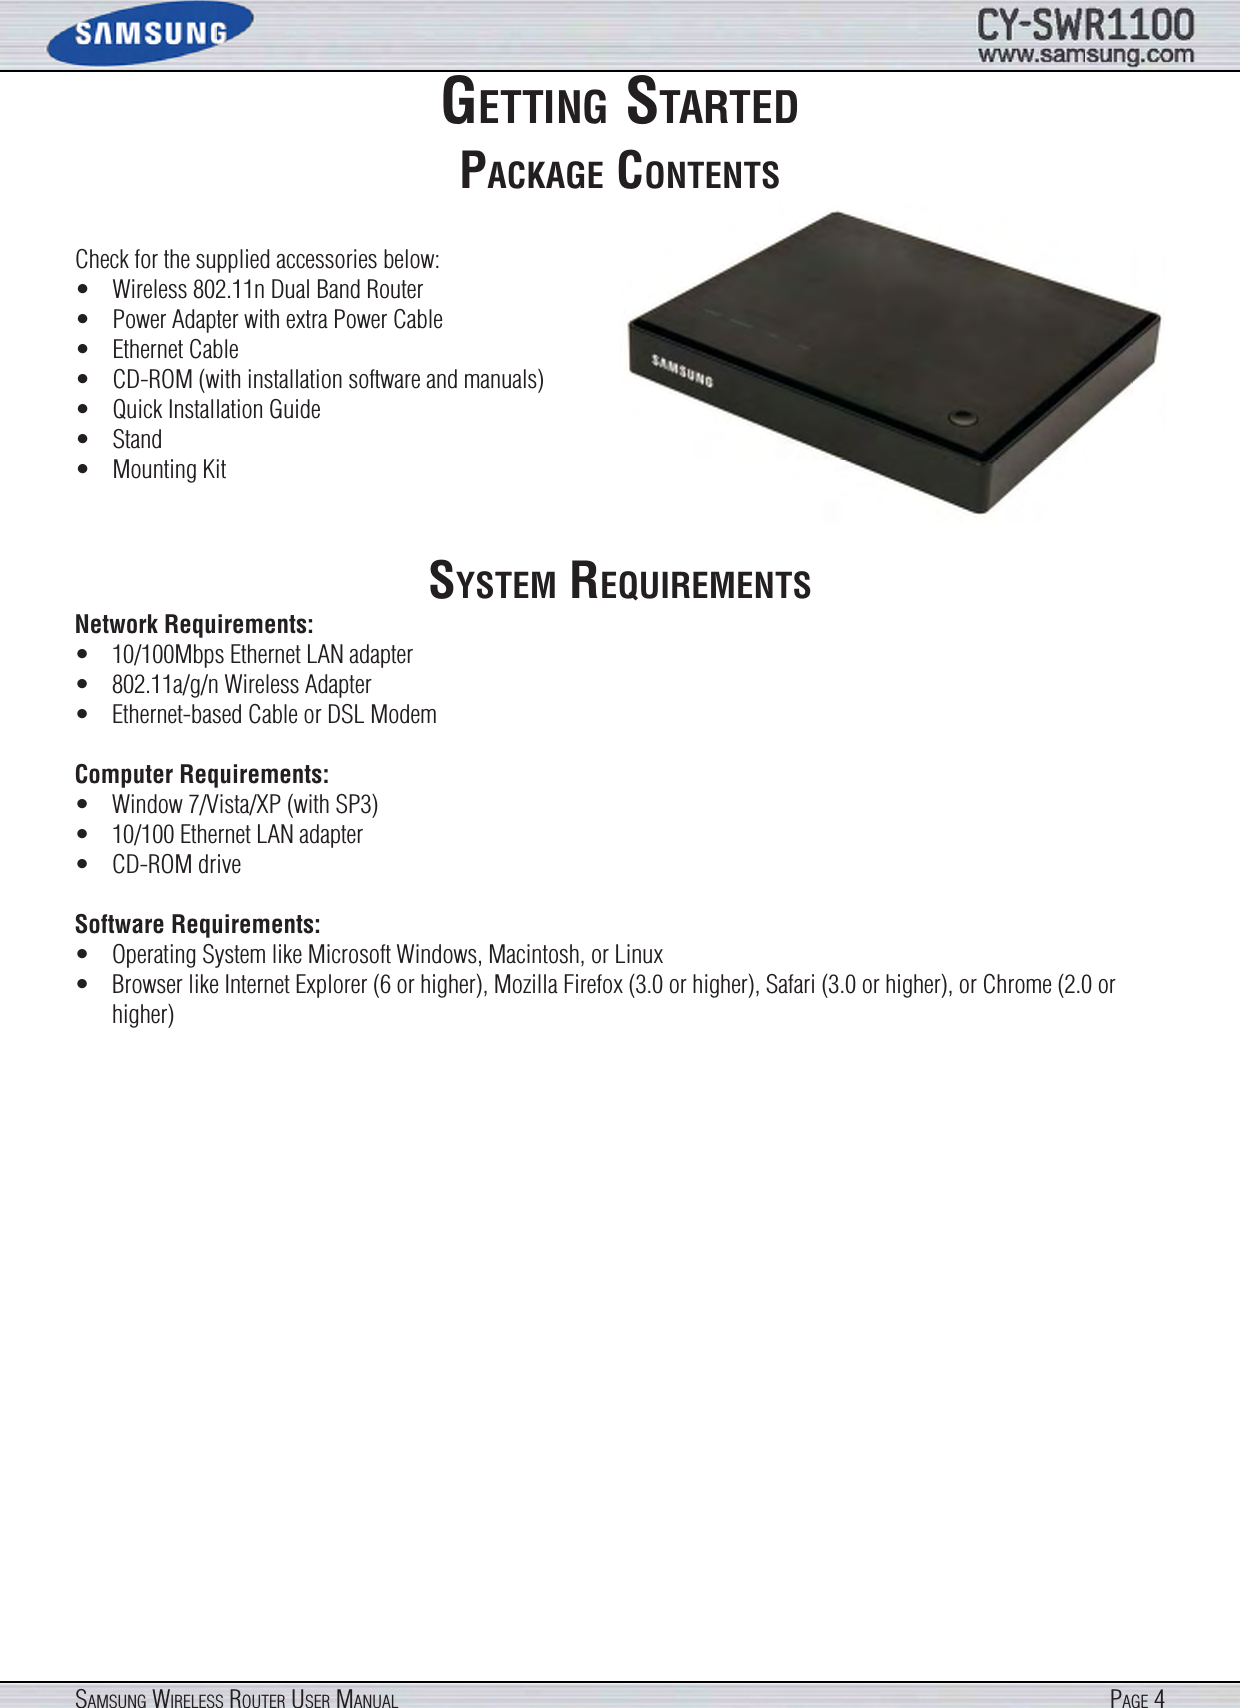 Page 4SamSung WireleSS router uSer manualgettIng StartedPackage contentSCheck for the supplied accessories below:•  Wireless 802.11n Dual Band Router•  Power Adapter with extra Power Cable•  Ethernet Cable•  CD-ROM (with installation software and manuals)•  Quick Installation Guide•  Stand•  Mounting KitSyStem requIrementSNetwork Requirements: •  10/100Mbps Ethernet LAN adapter•  802.11a/g/n Wireless Adapter•  Ethernet-based Cable or DSL ModemComputer Requirements:•  Window 7/Vista/XP (with SP3)•  10/100 Ethernet LAN adapter•  CD-ROM driveSoftware Requirements:•  Operating System like Microsoft Windows, Macintosh, or Linux•  Browser like Internet Explorer (6 or higher), Mozilla Firefox (3.0 or higher), Safari (3.0 or higher), or Chrome (2.0 or higher)